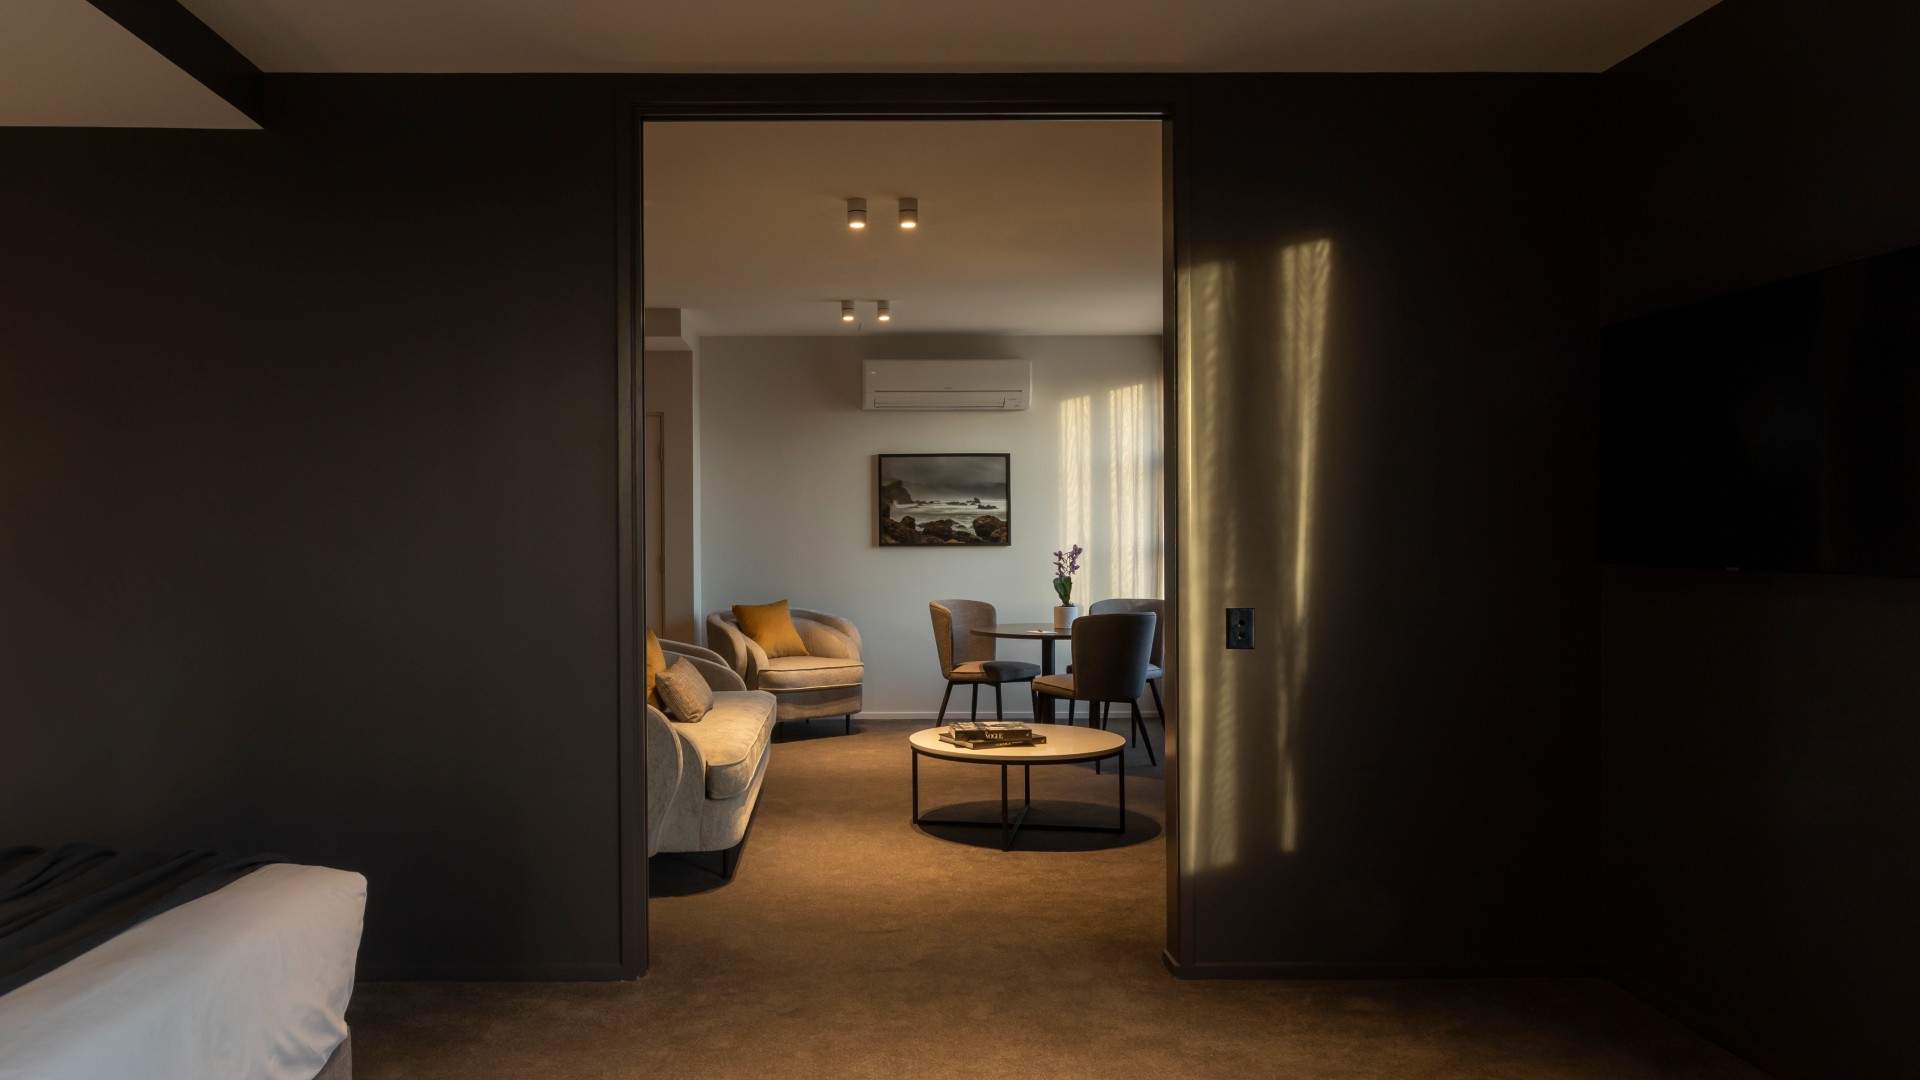 The Mayfair, Christchurch's New $23m Boutique Luxury Hotel Has Finally Opened